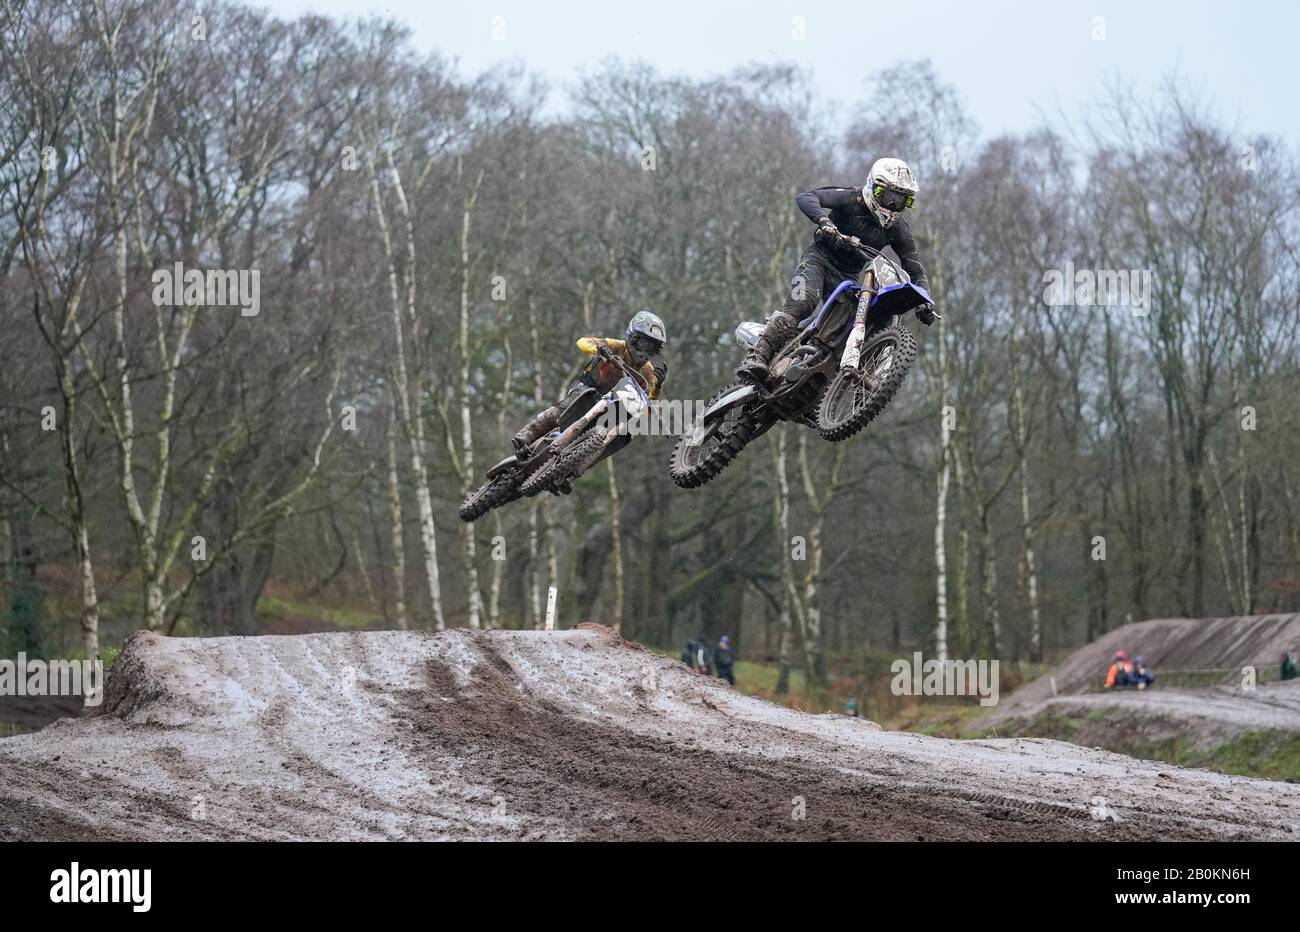 Jack Bintcliffe (52) leads Gianluca Facchetti (22) over a jump during practice at the Hawkstone International Motocross race, in Hawkstone Park, Shrewsbury, United Kingdom. February 9 2020. (Photo by IOS/ESPA-Images) Stock Photo